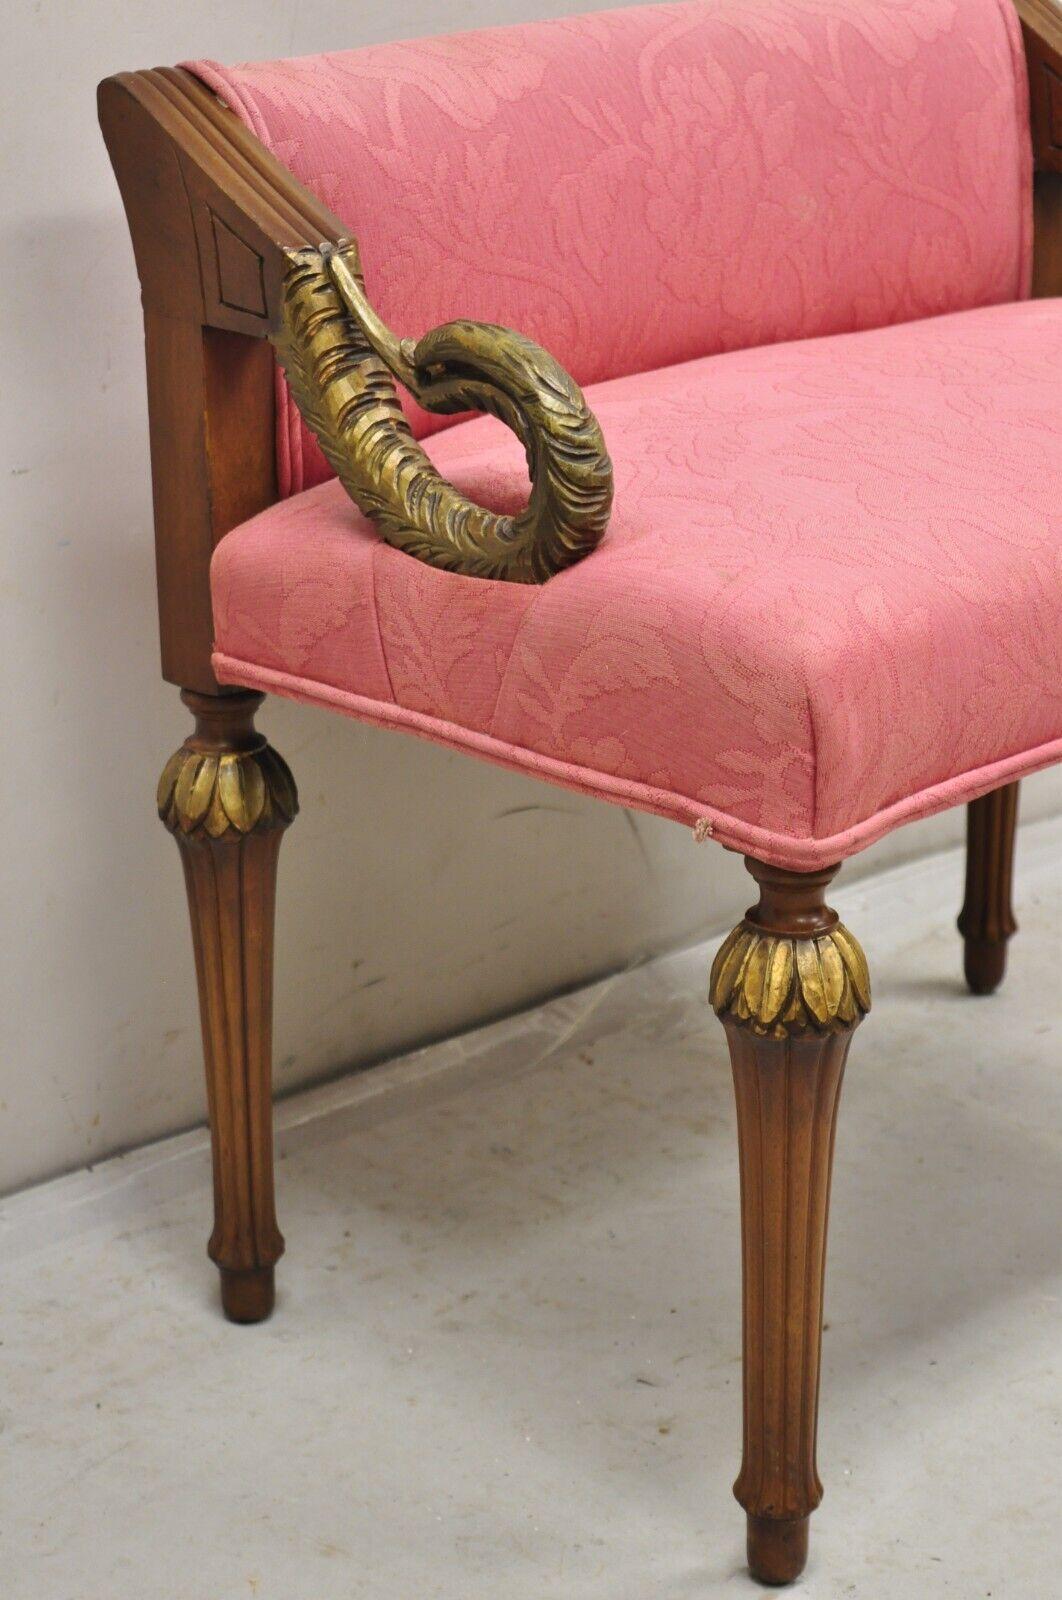 20th Century Vintage French Louis XVI Style Pink Vanity Chair Bench Seat w/ Swan Carved Arms